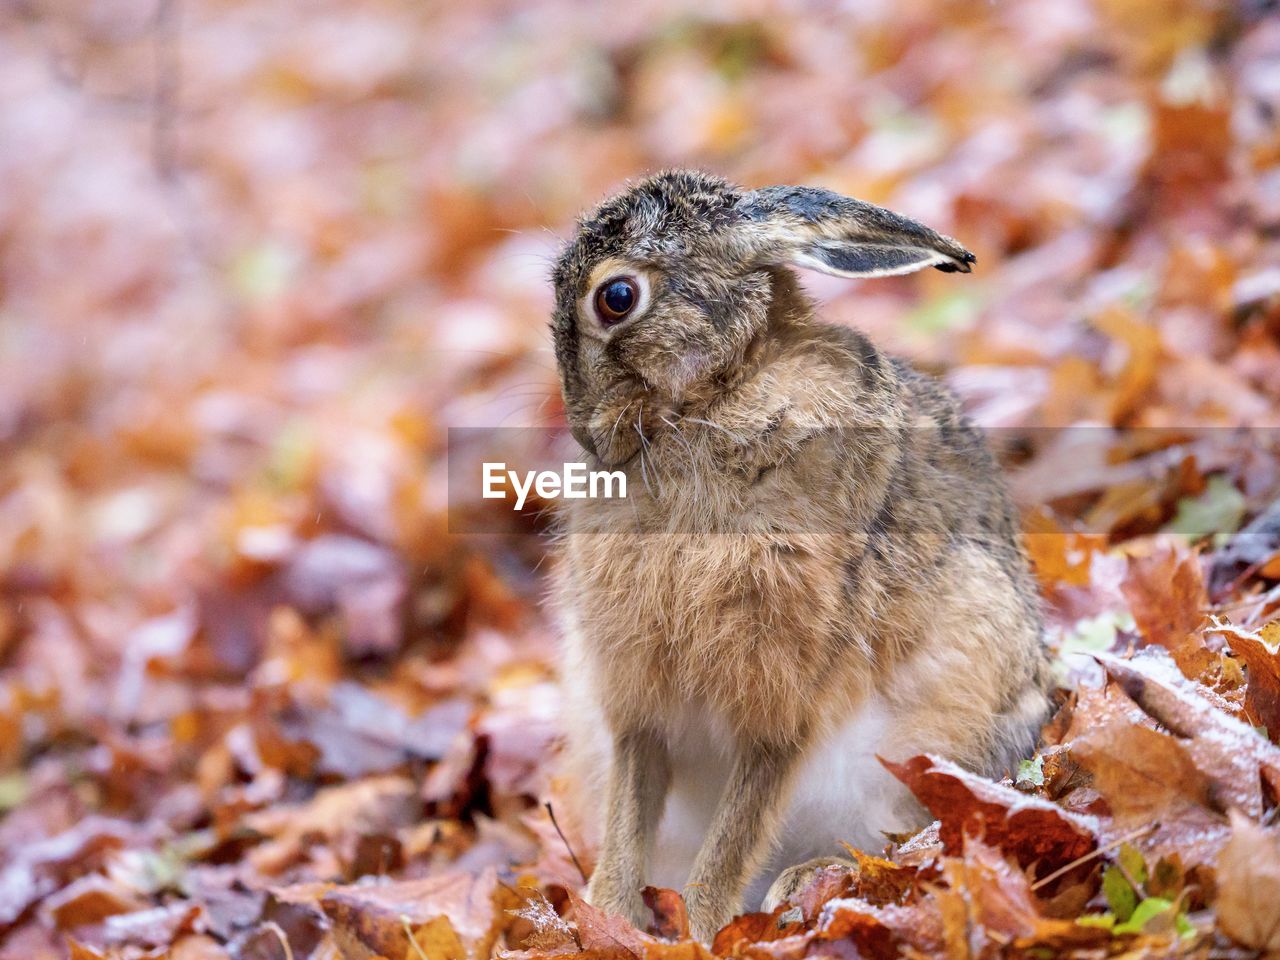 Close-up of an animal on field during autumn